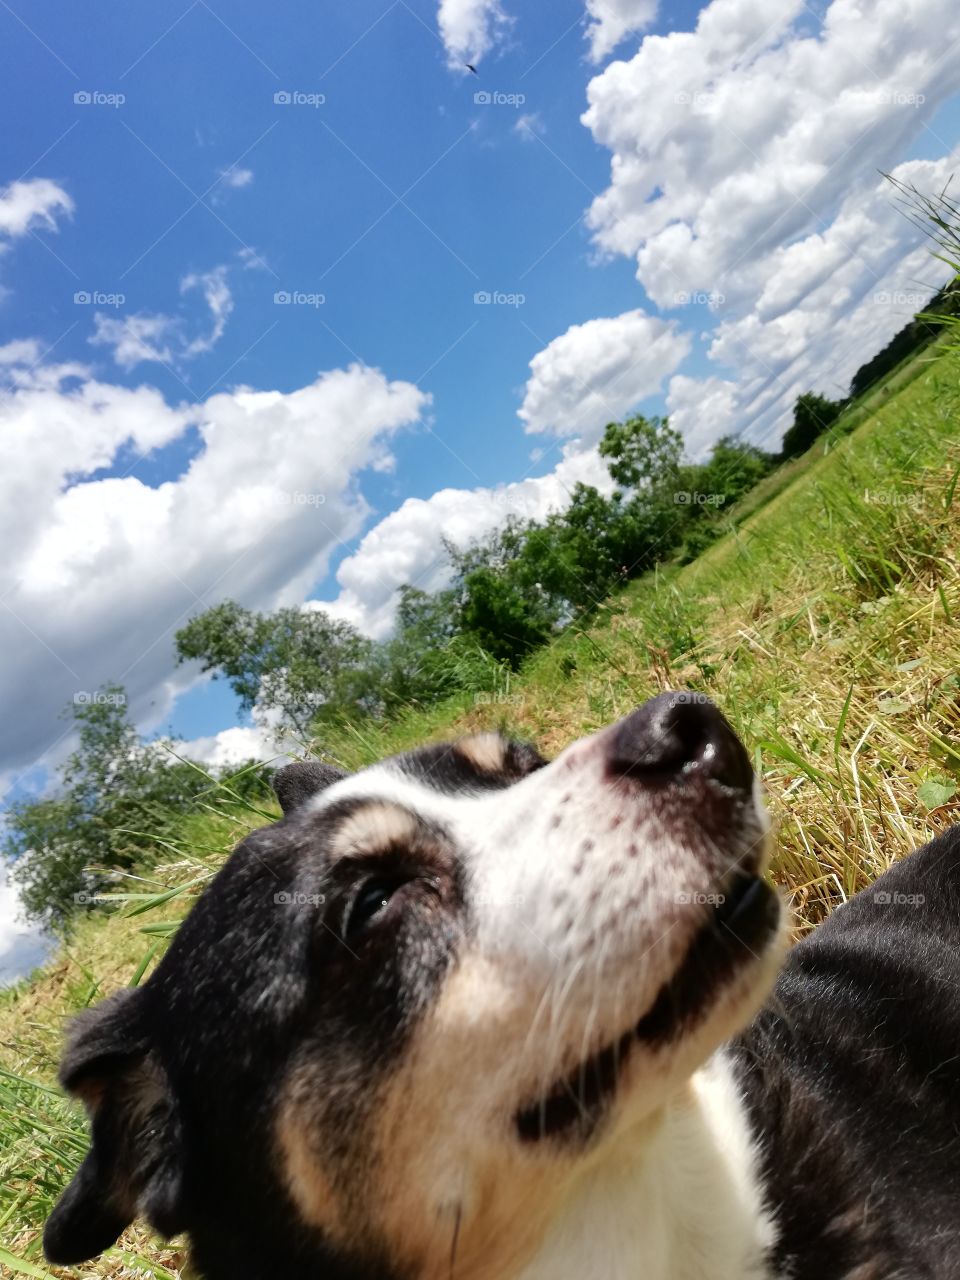 Dog lying in a field in the sun with blue sky and clouds in the background